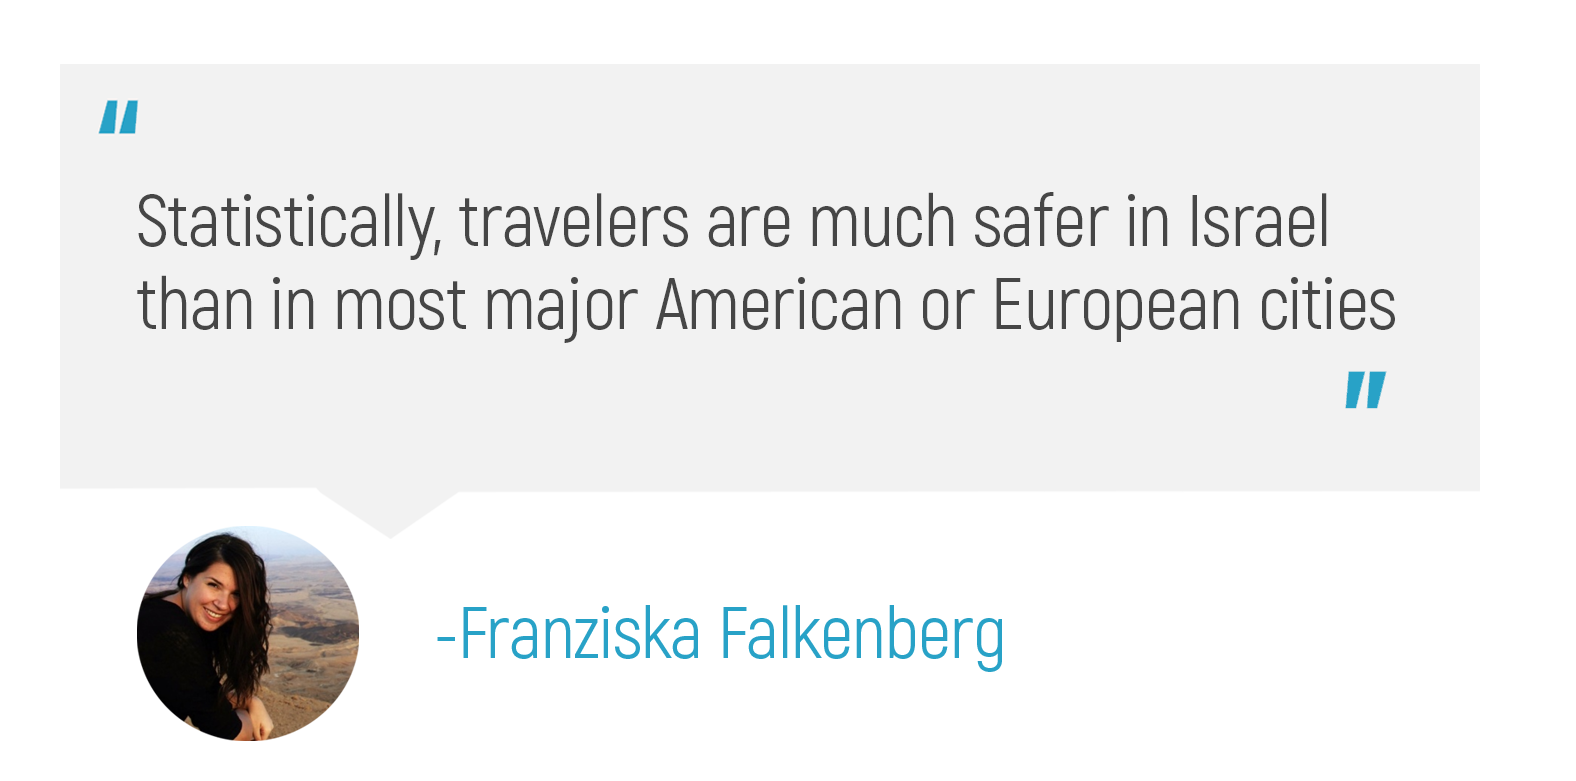 "Statistically, travelers are much safer in Israel than in most major American or European cities"